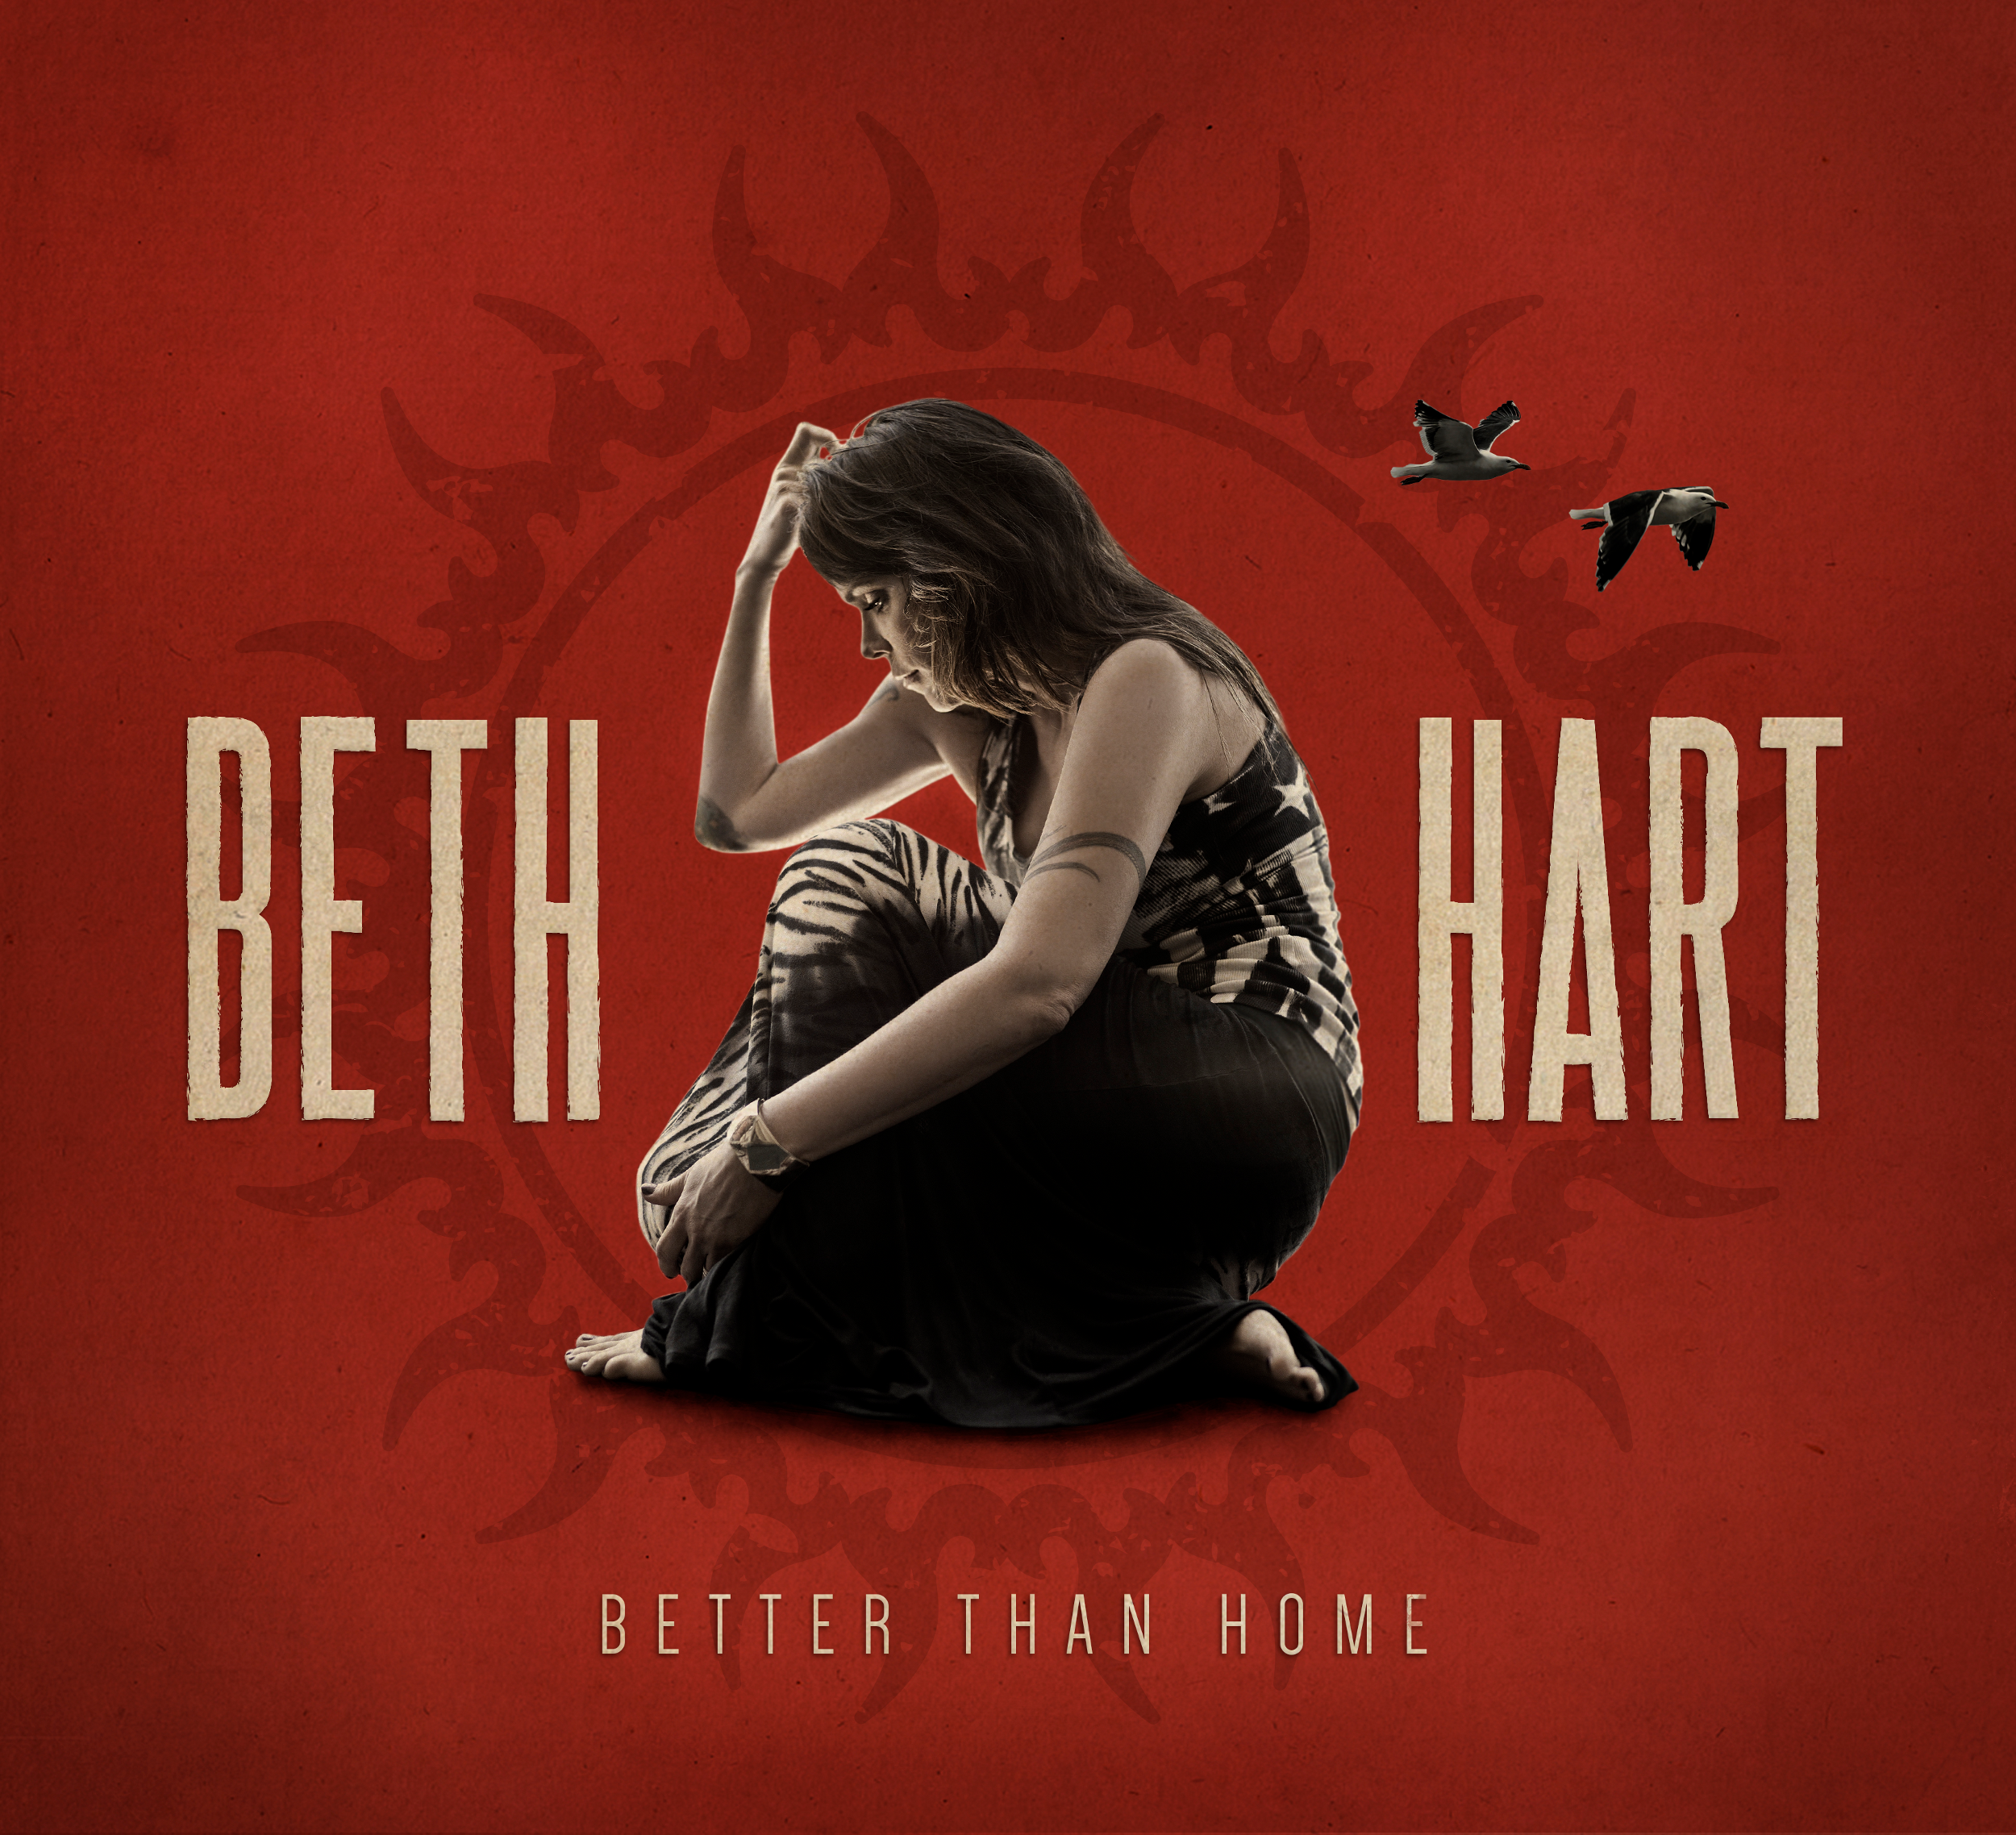 Beth Hart - Better Than Home (2015) FLAC Download